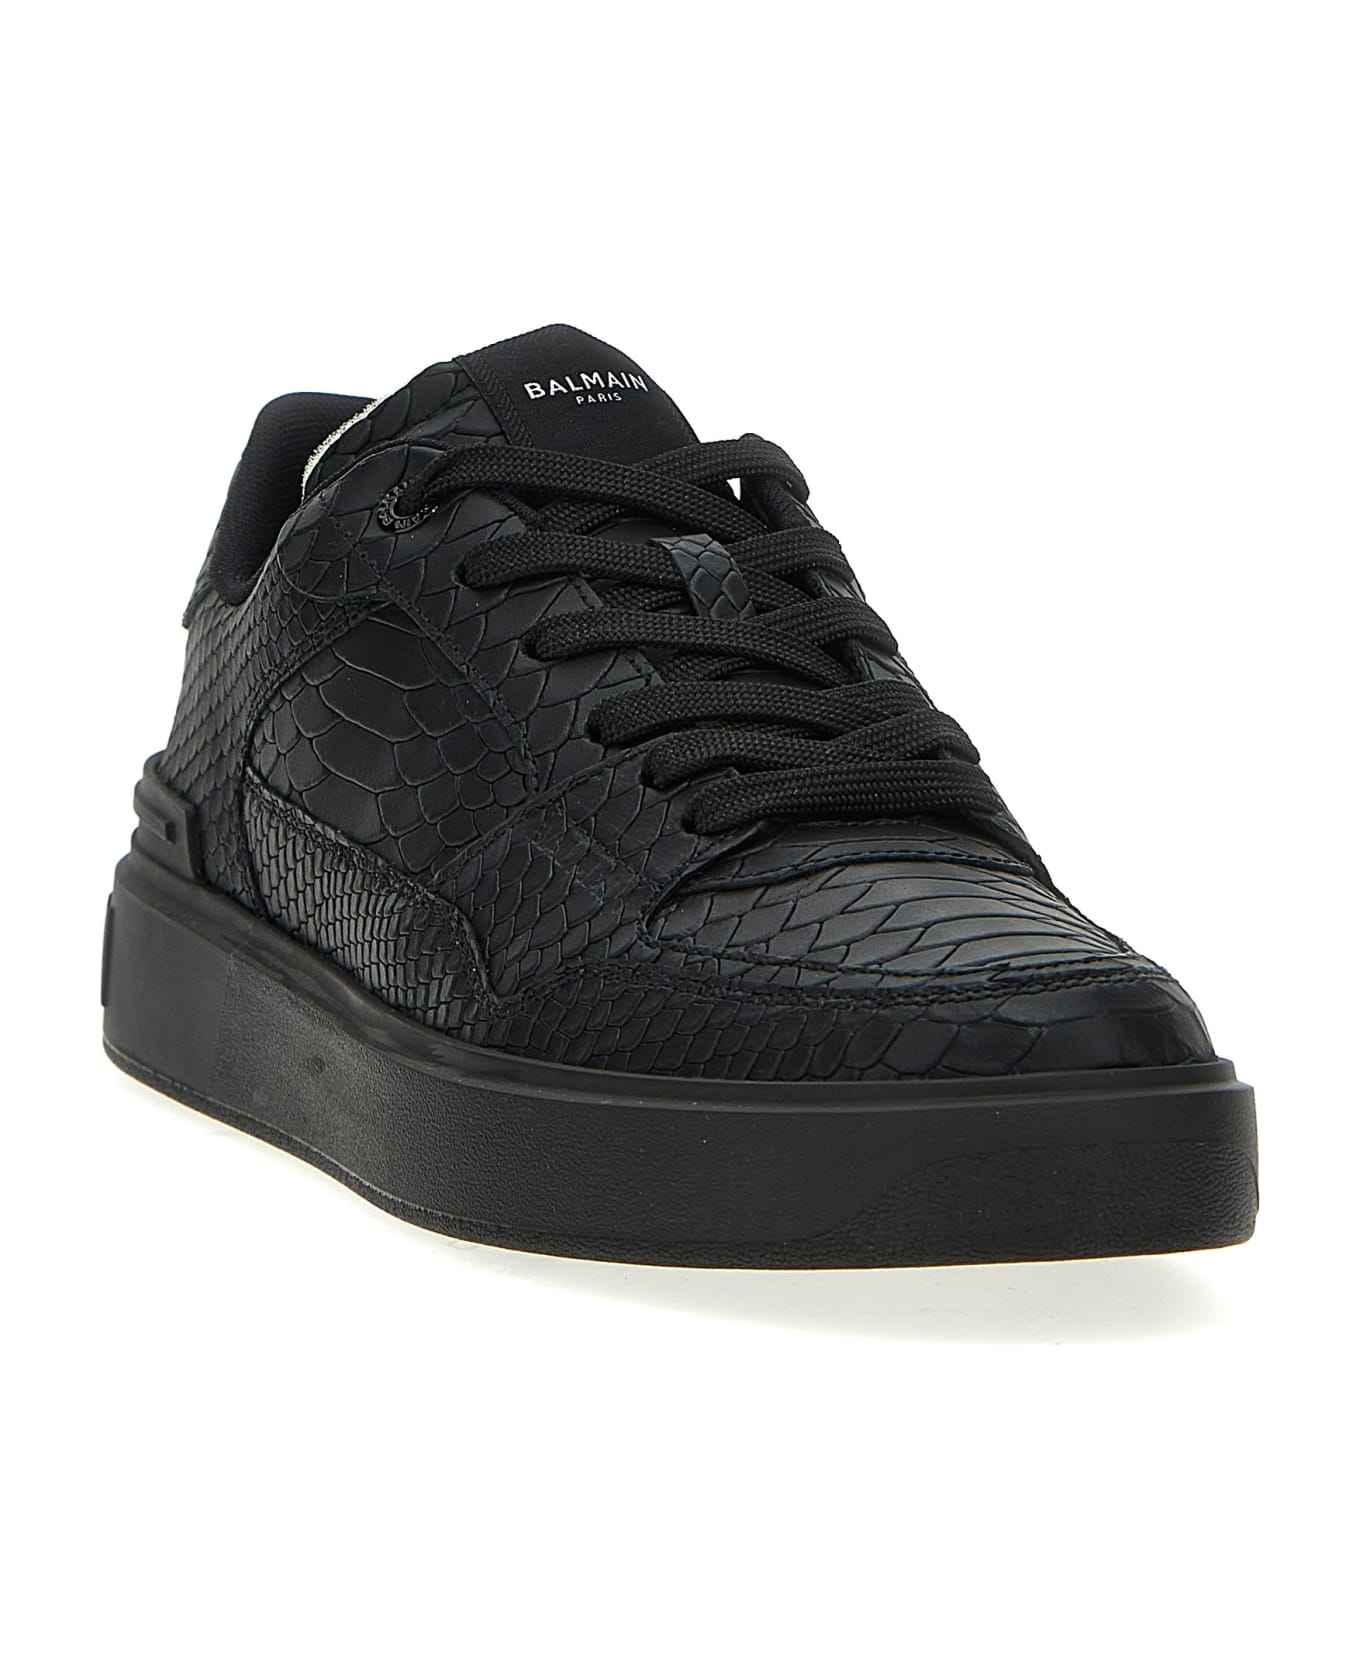 Balmain B-court Leather And Leather Sneakers - Black スニーカー